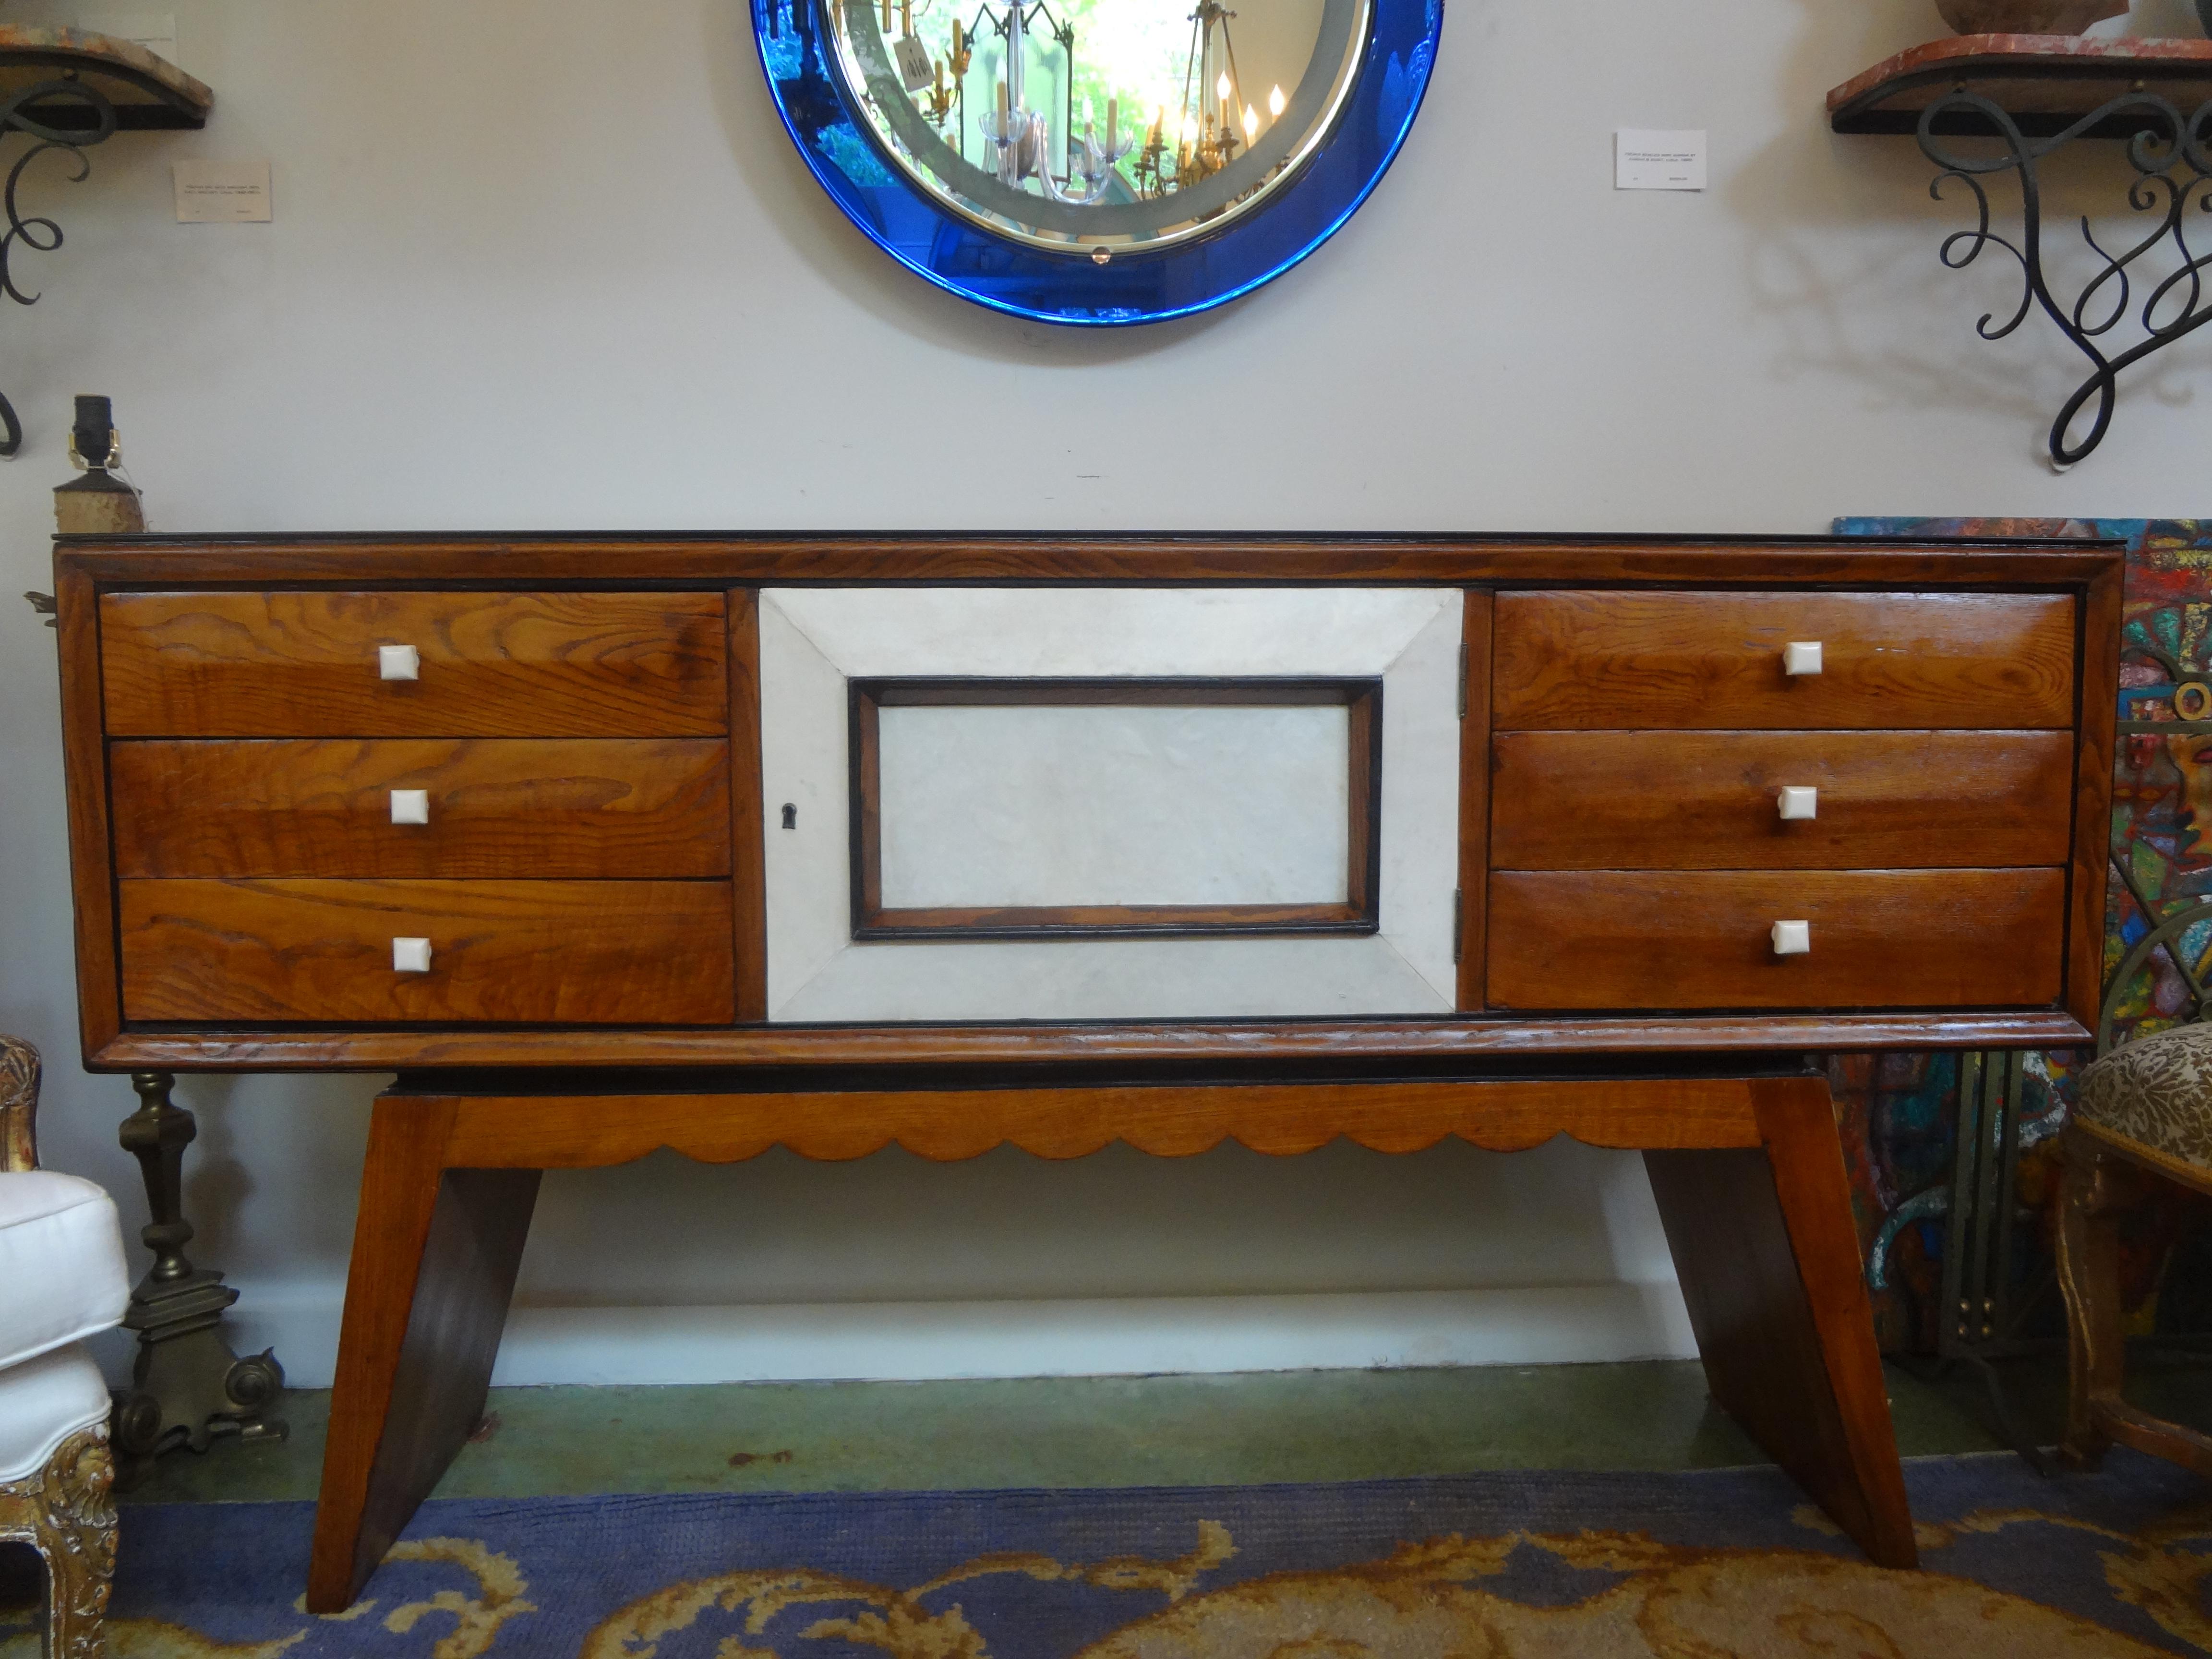 Italian Mid-Century Wood and Shagreen Credenza or Commode After Paolo Buffa.
Mid-century Italian wood and shagreen/parchment credenza, commode, chest or console table inspired by Paolo Buffa. Our Italian Brutalist style credenza is comprised of a